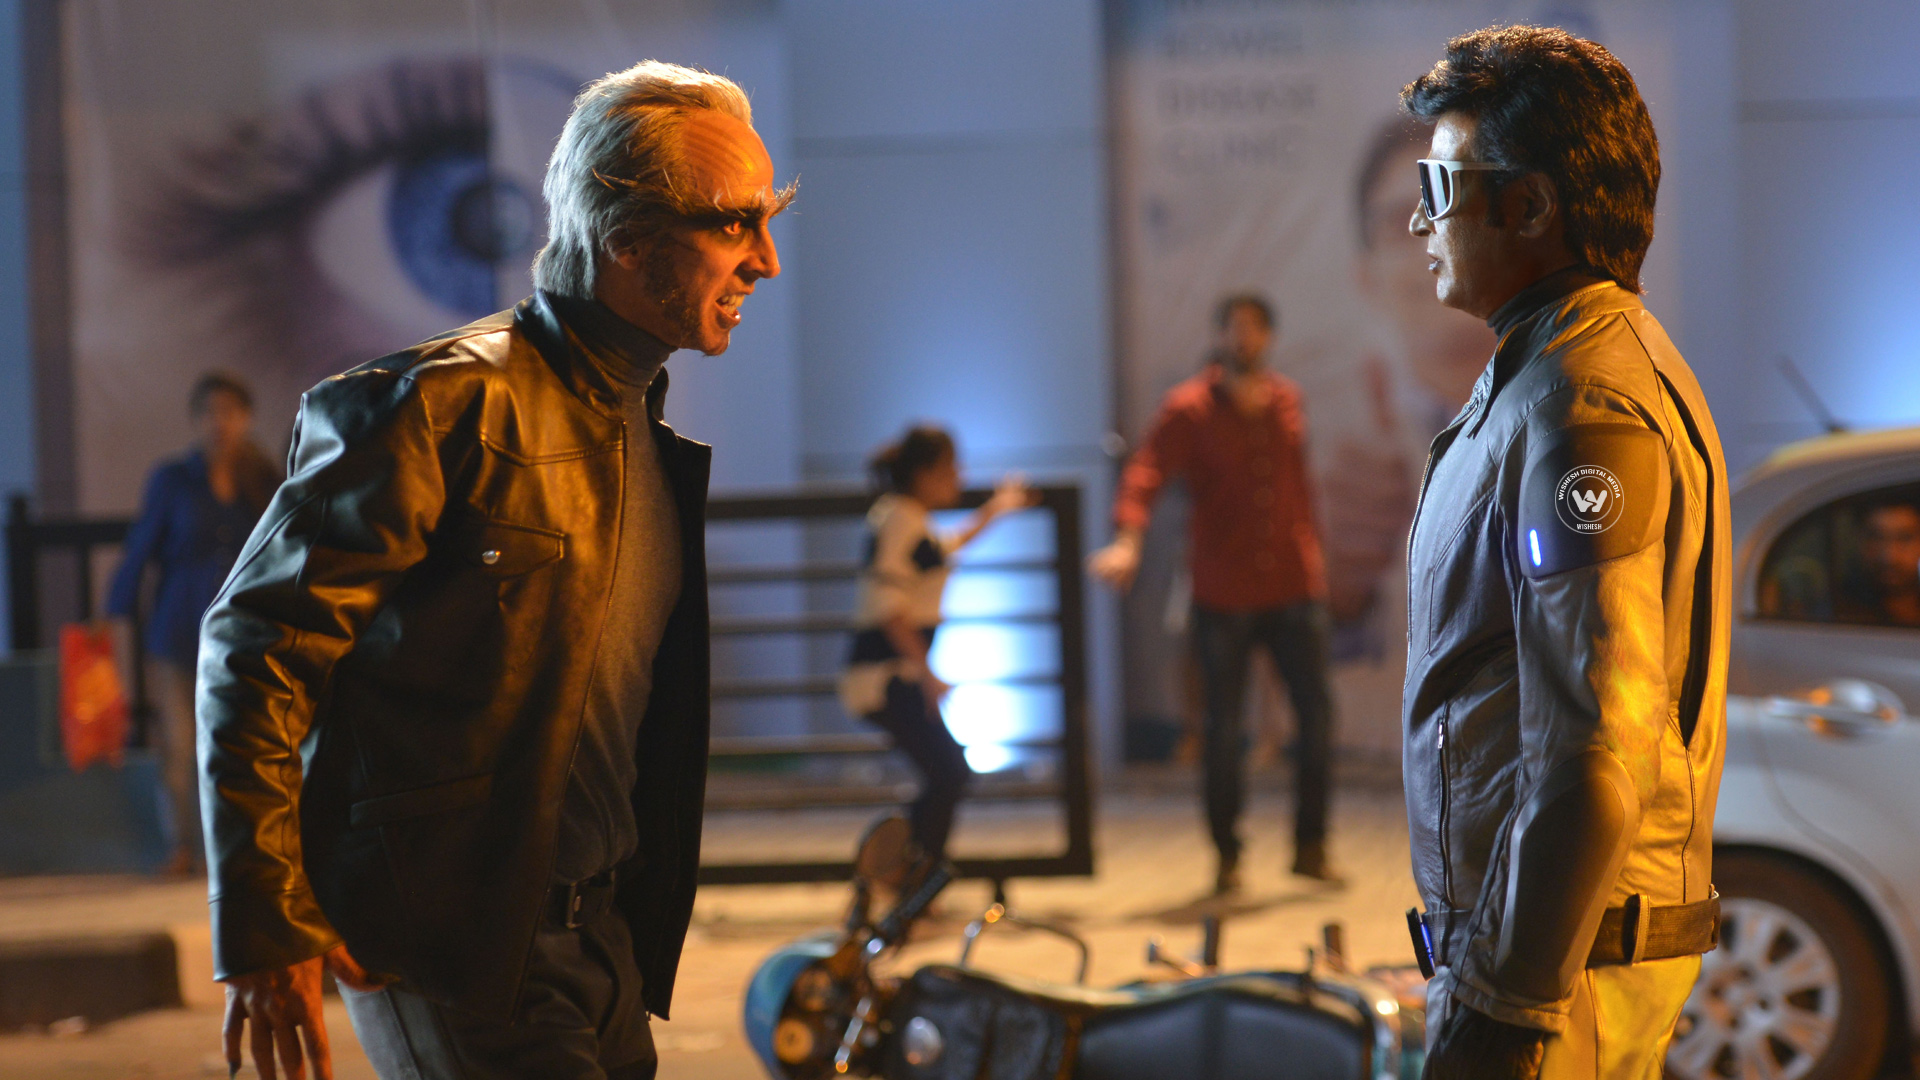 2.0 Movie Latest Wallpapers | Wallpaper 8of 8 | 2.0 Movie Latest HD Wallpapers | 2point0-wallpapers-08